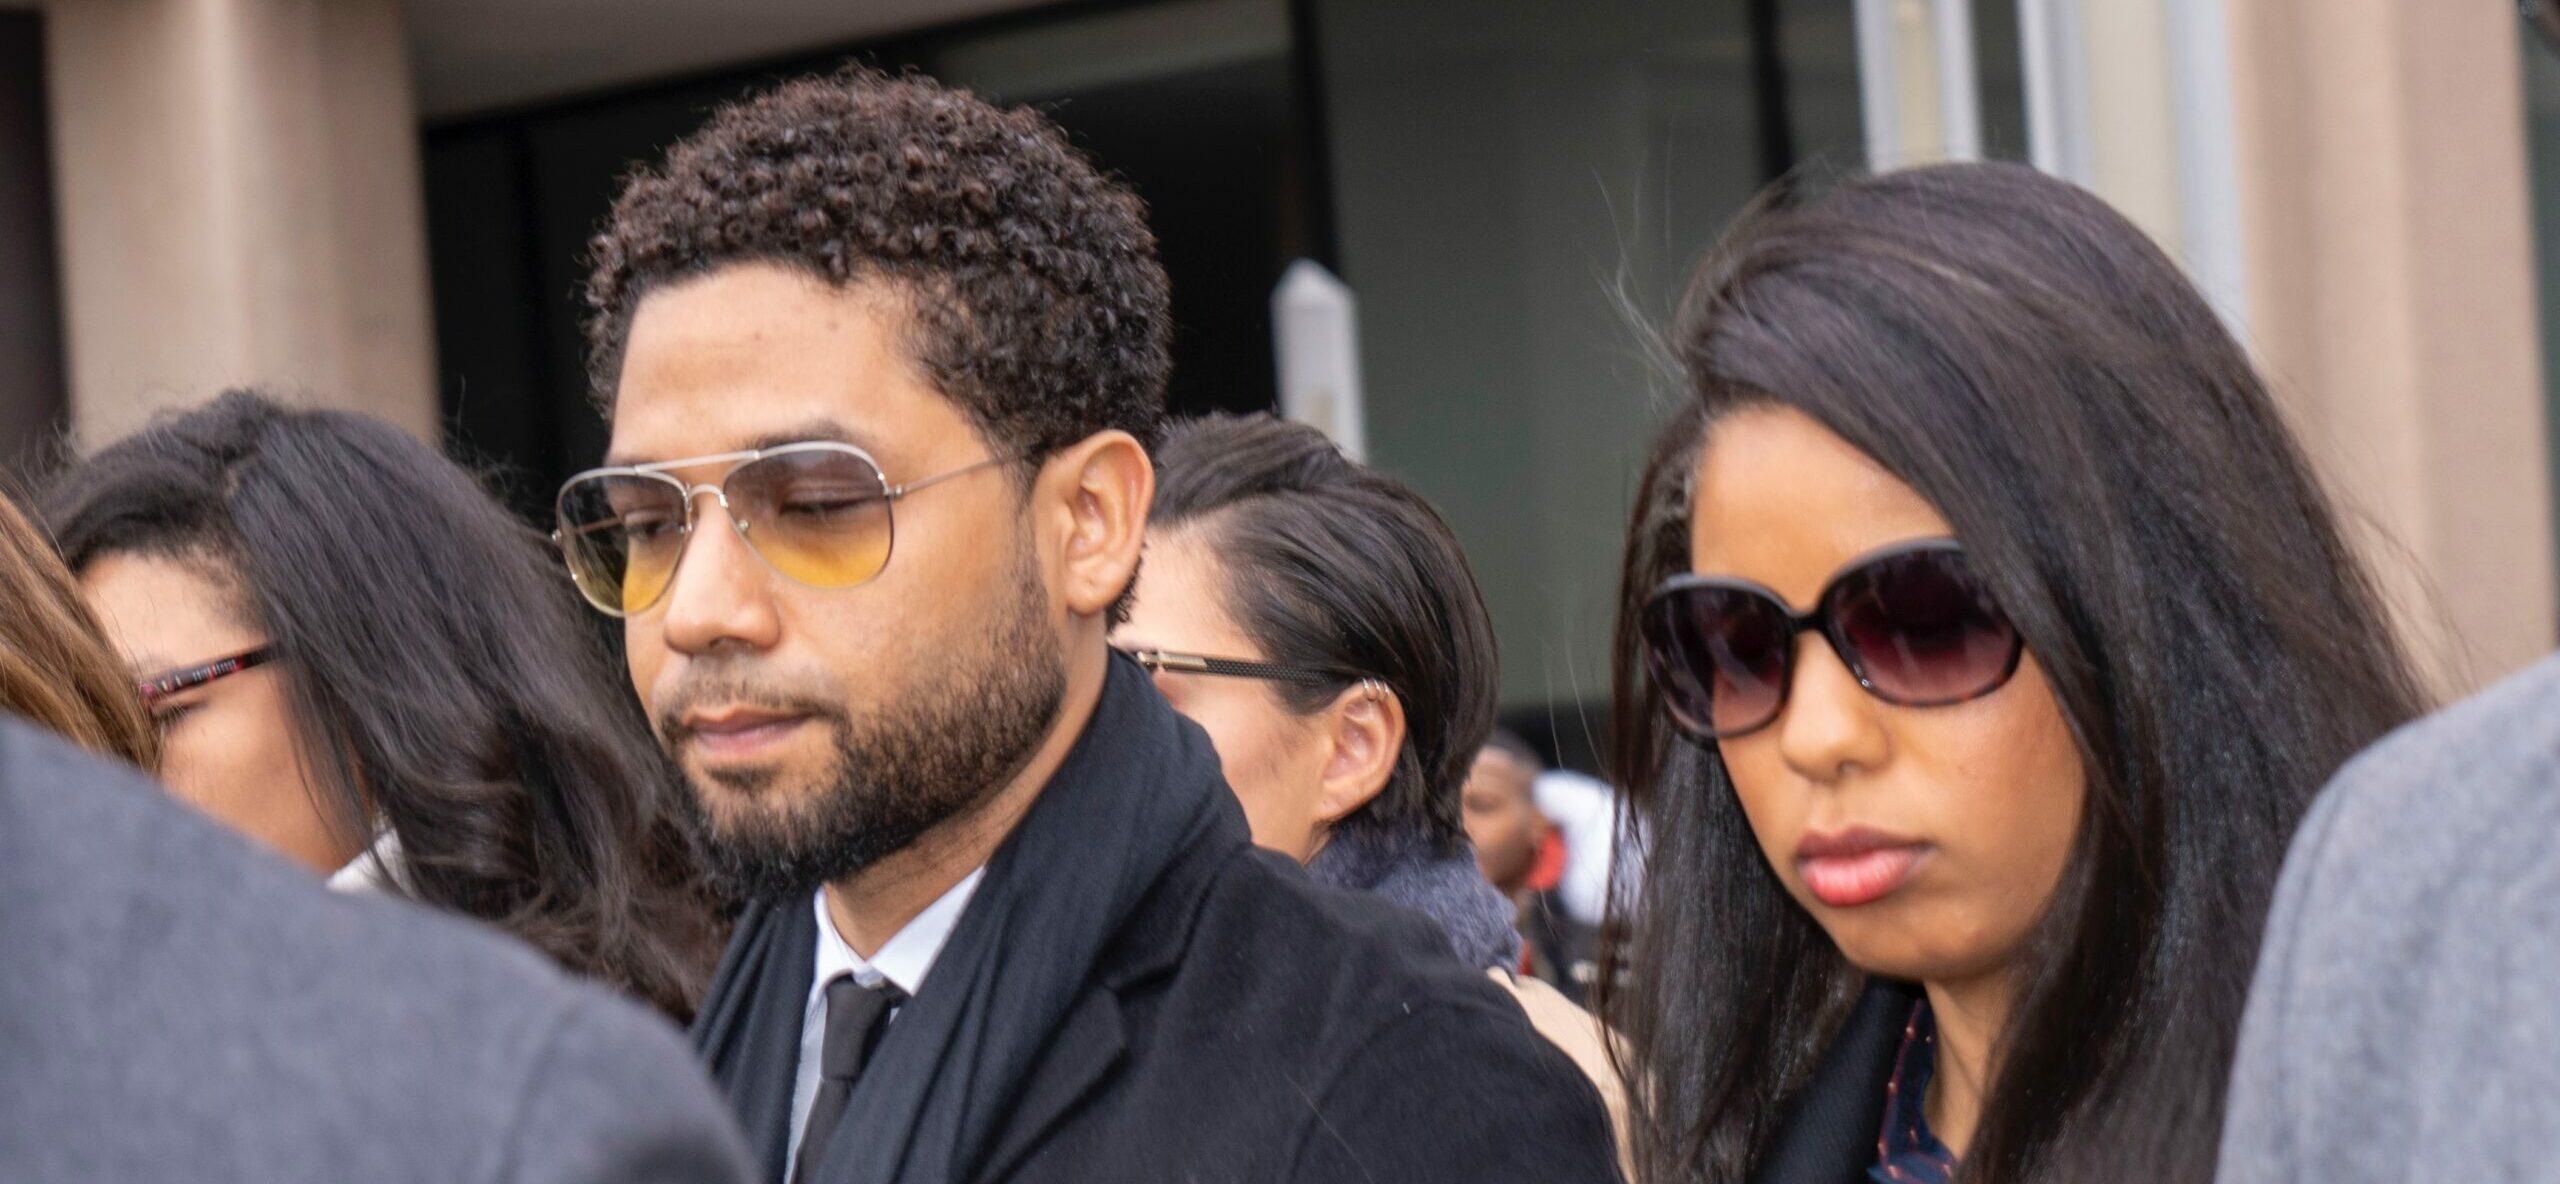 Jussie Smollett pleads not guilty to felony charges in Chicago court